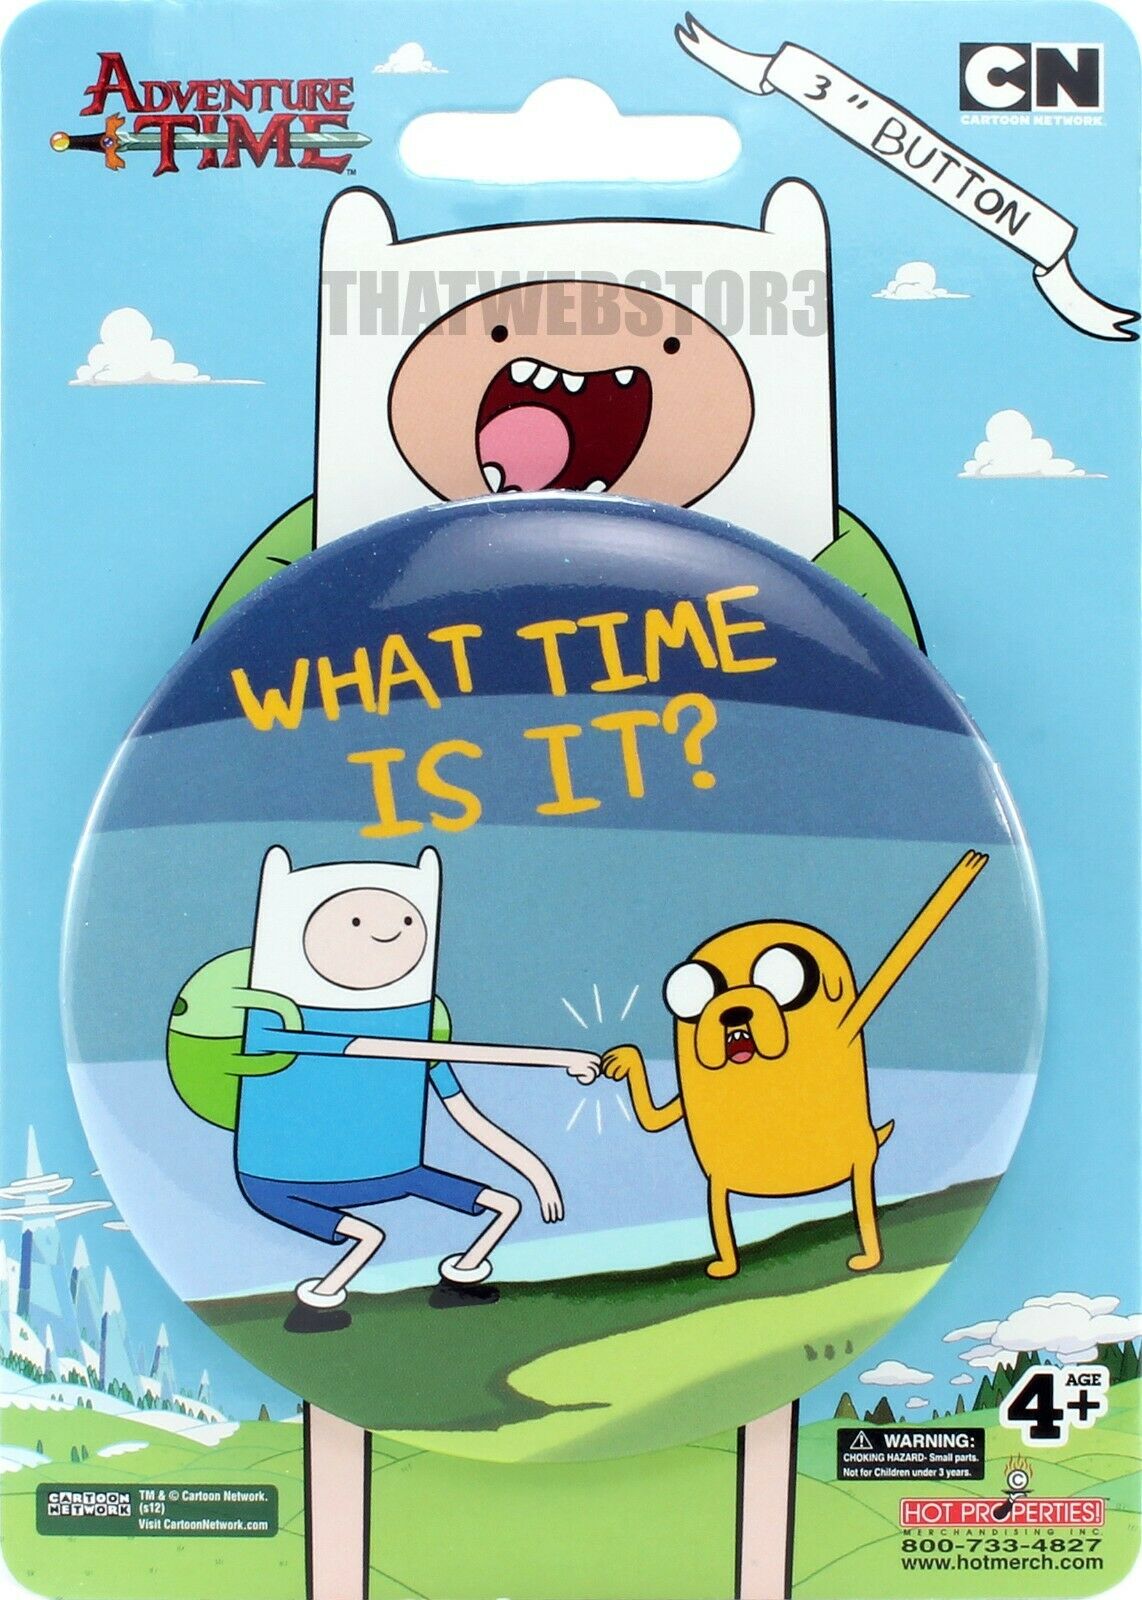 Adventure Time With Finn And Jake What Time Is It? 3" Button ~ Licensed